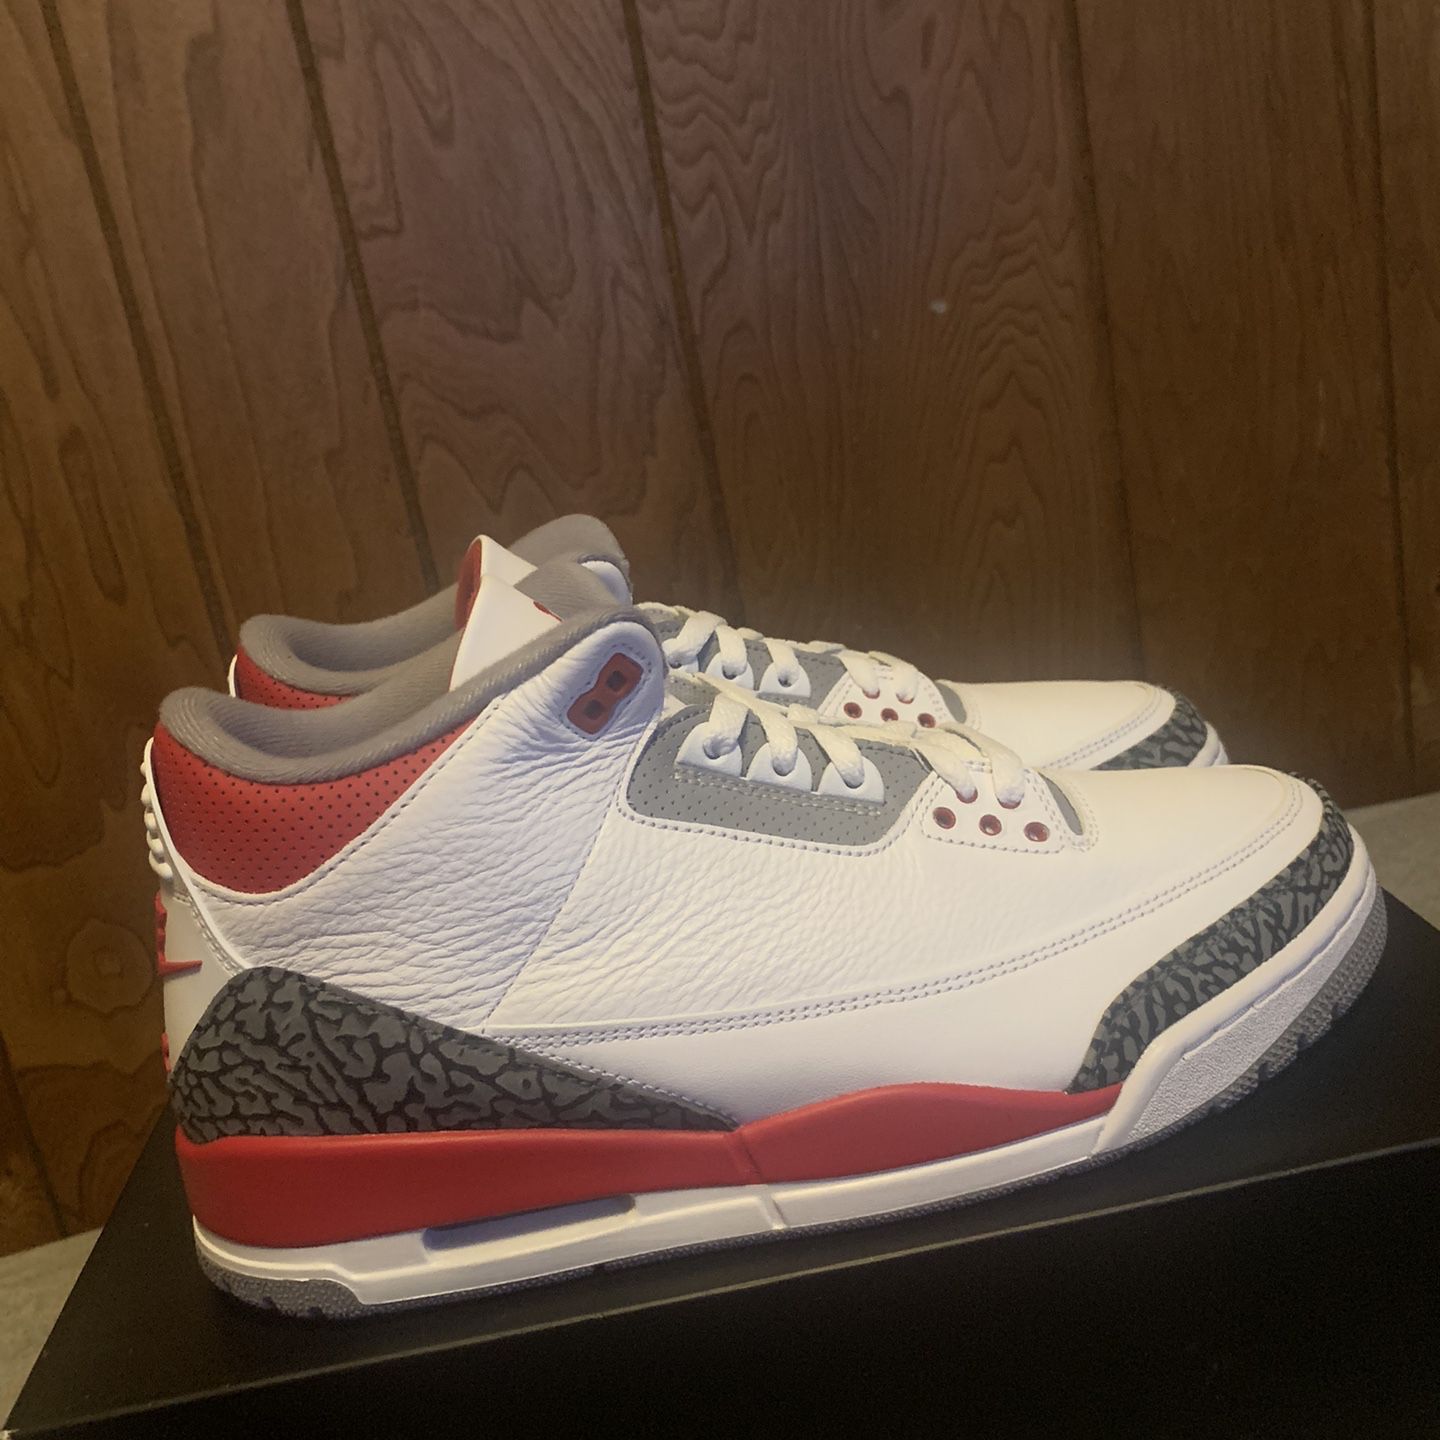 Fire Red 3s Size 11.5